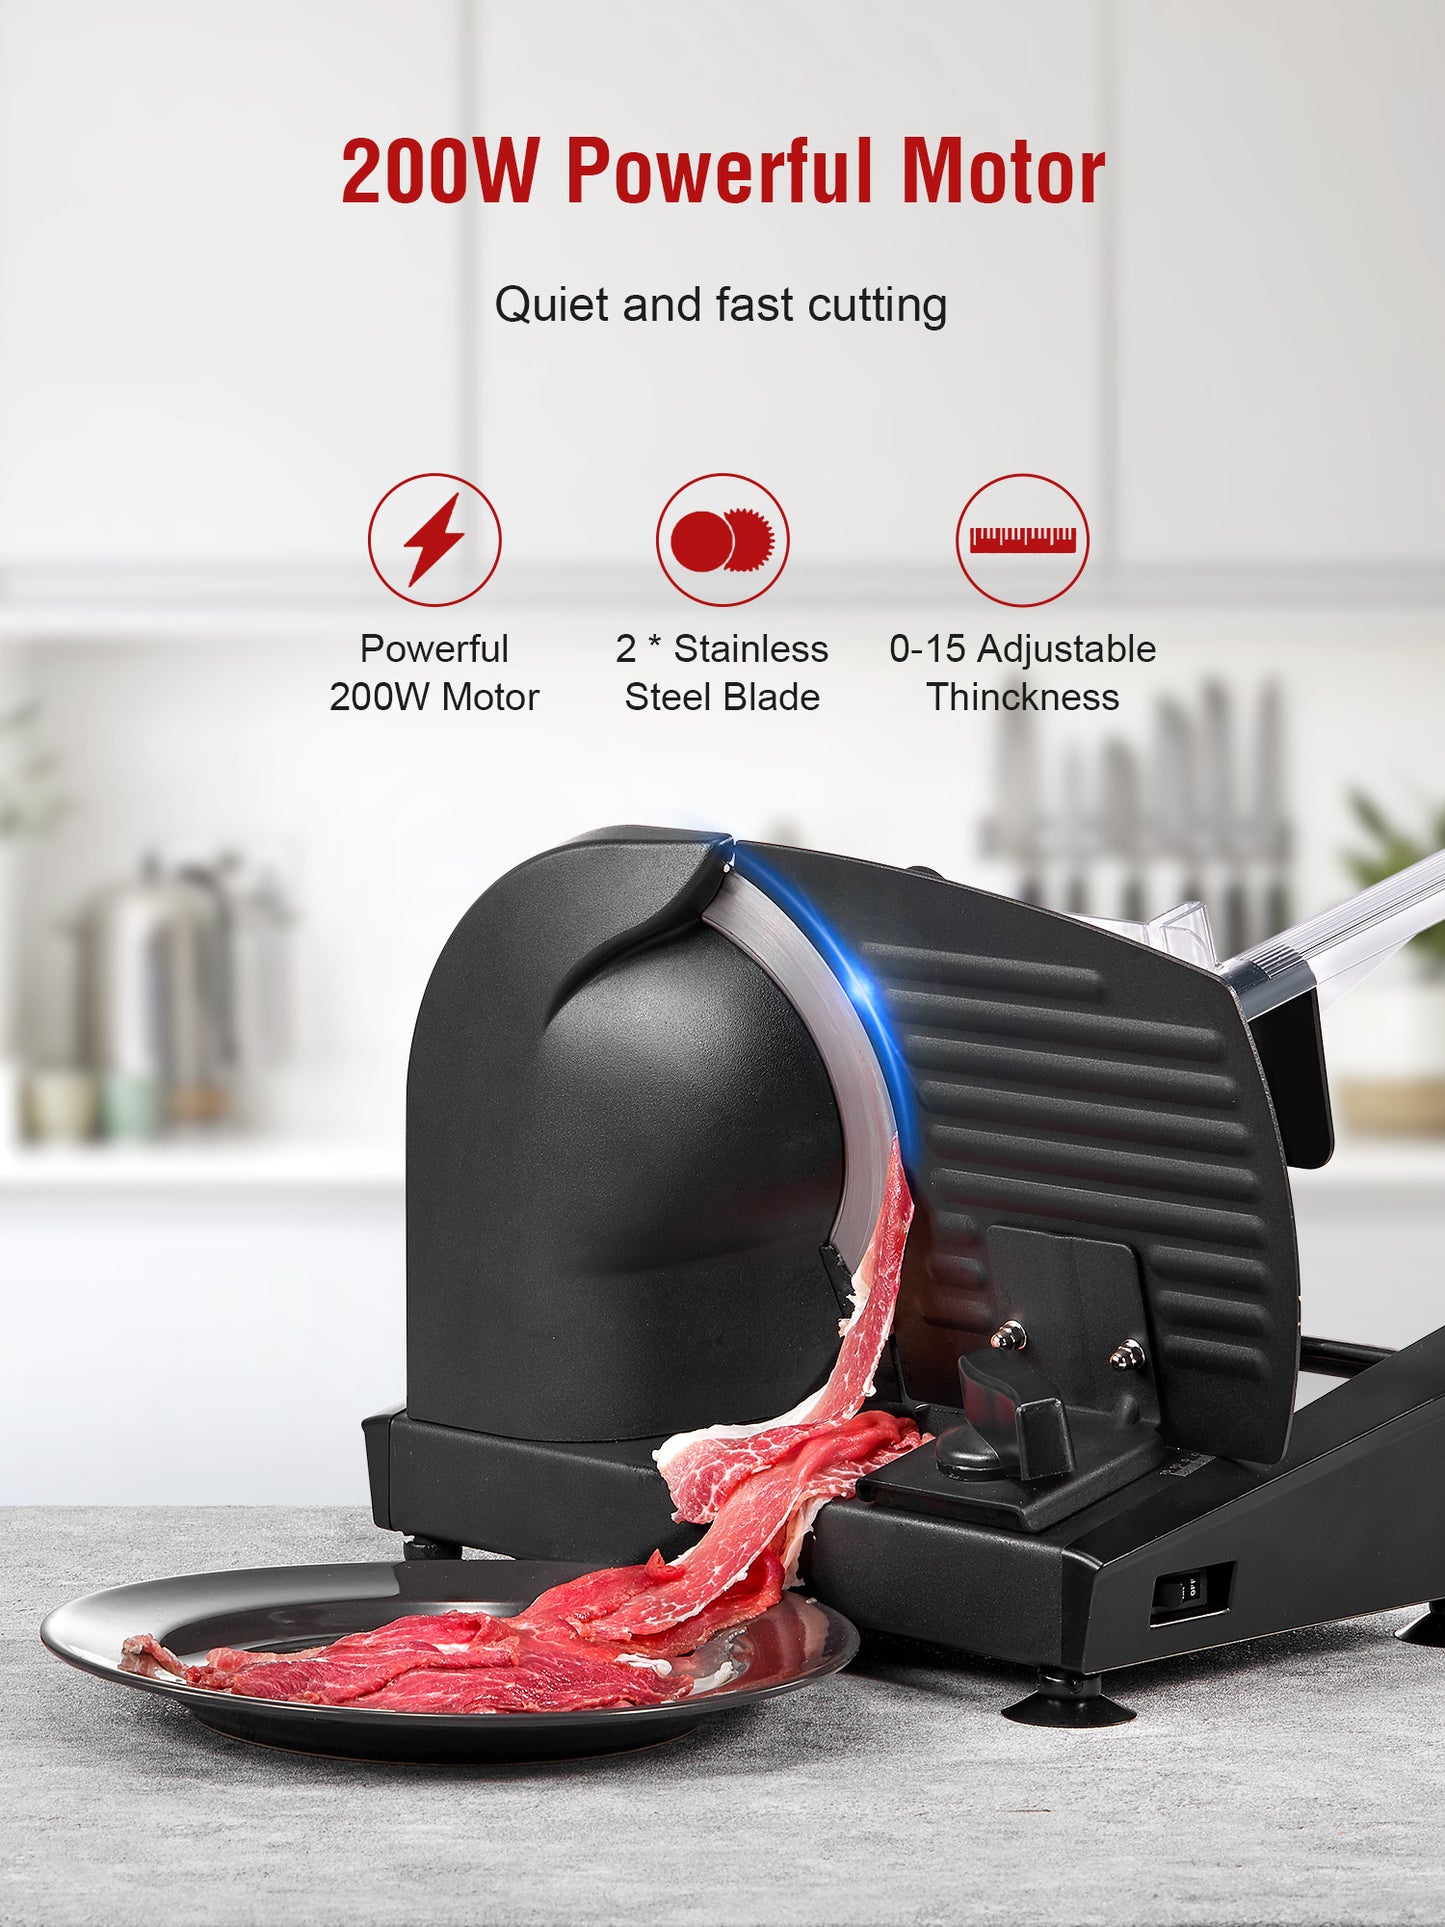 Aicok Home Use Meat Slicer, 200W Electric Deli & Food Slicer Home Use, 0-15mm Adjustable Thickness Food Slicer Machine Cut Meat, Cheese, Bread, powerful motor, SL-519N